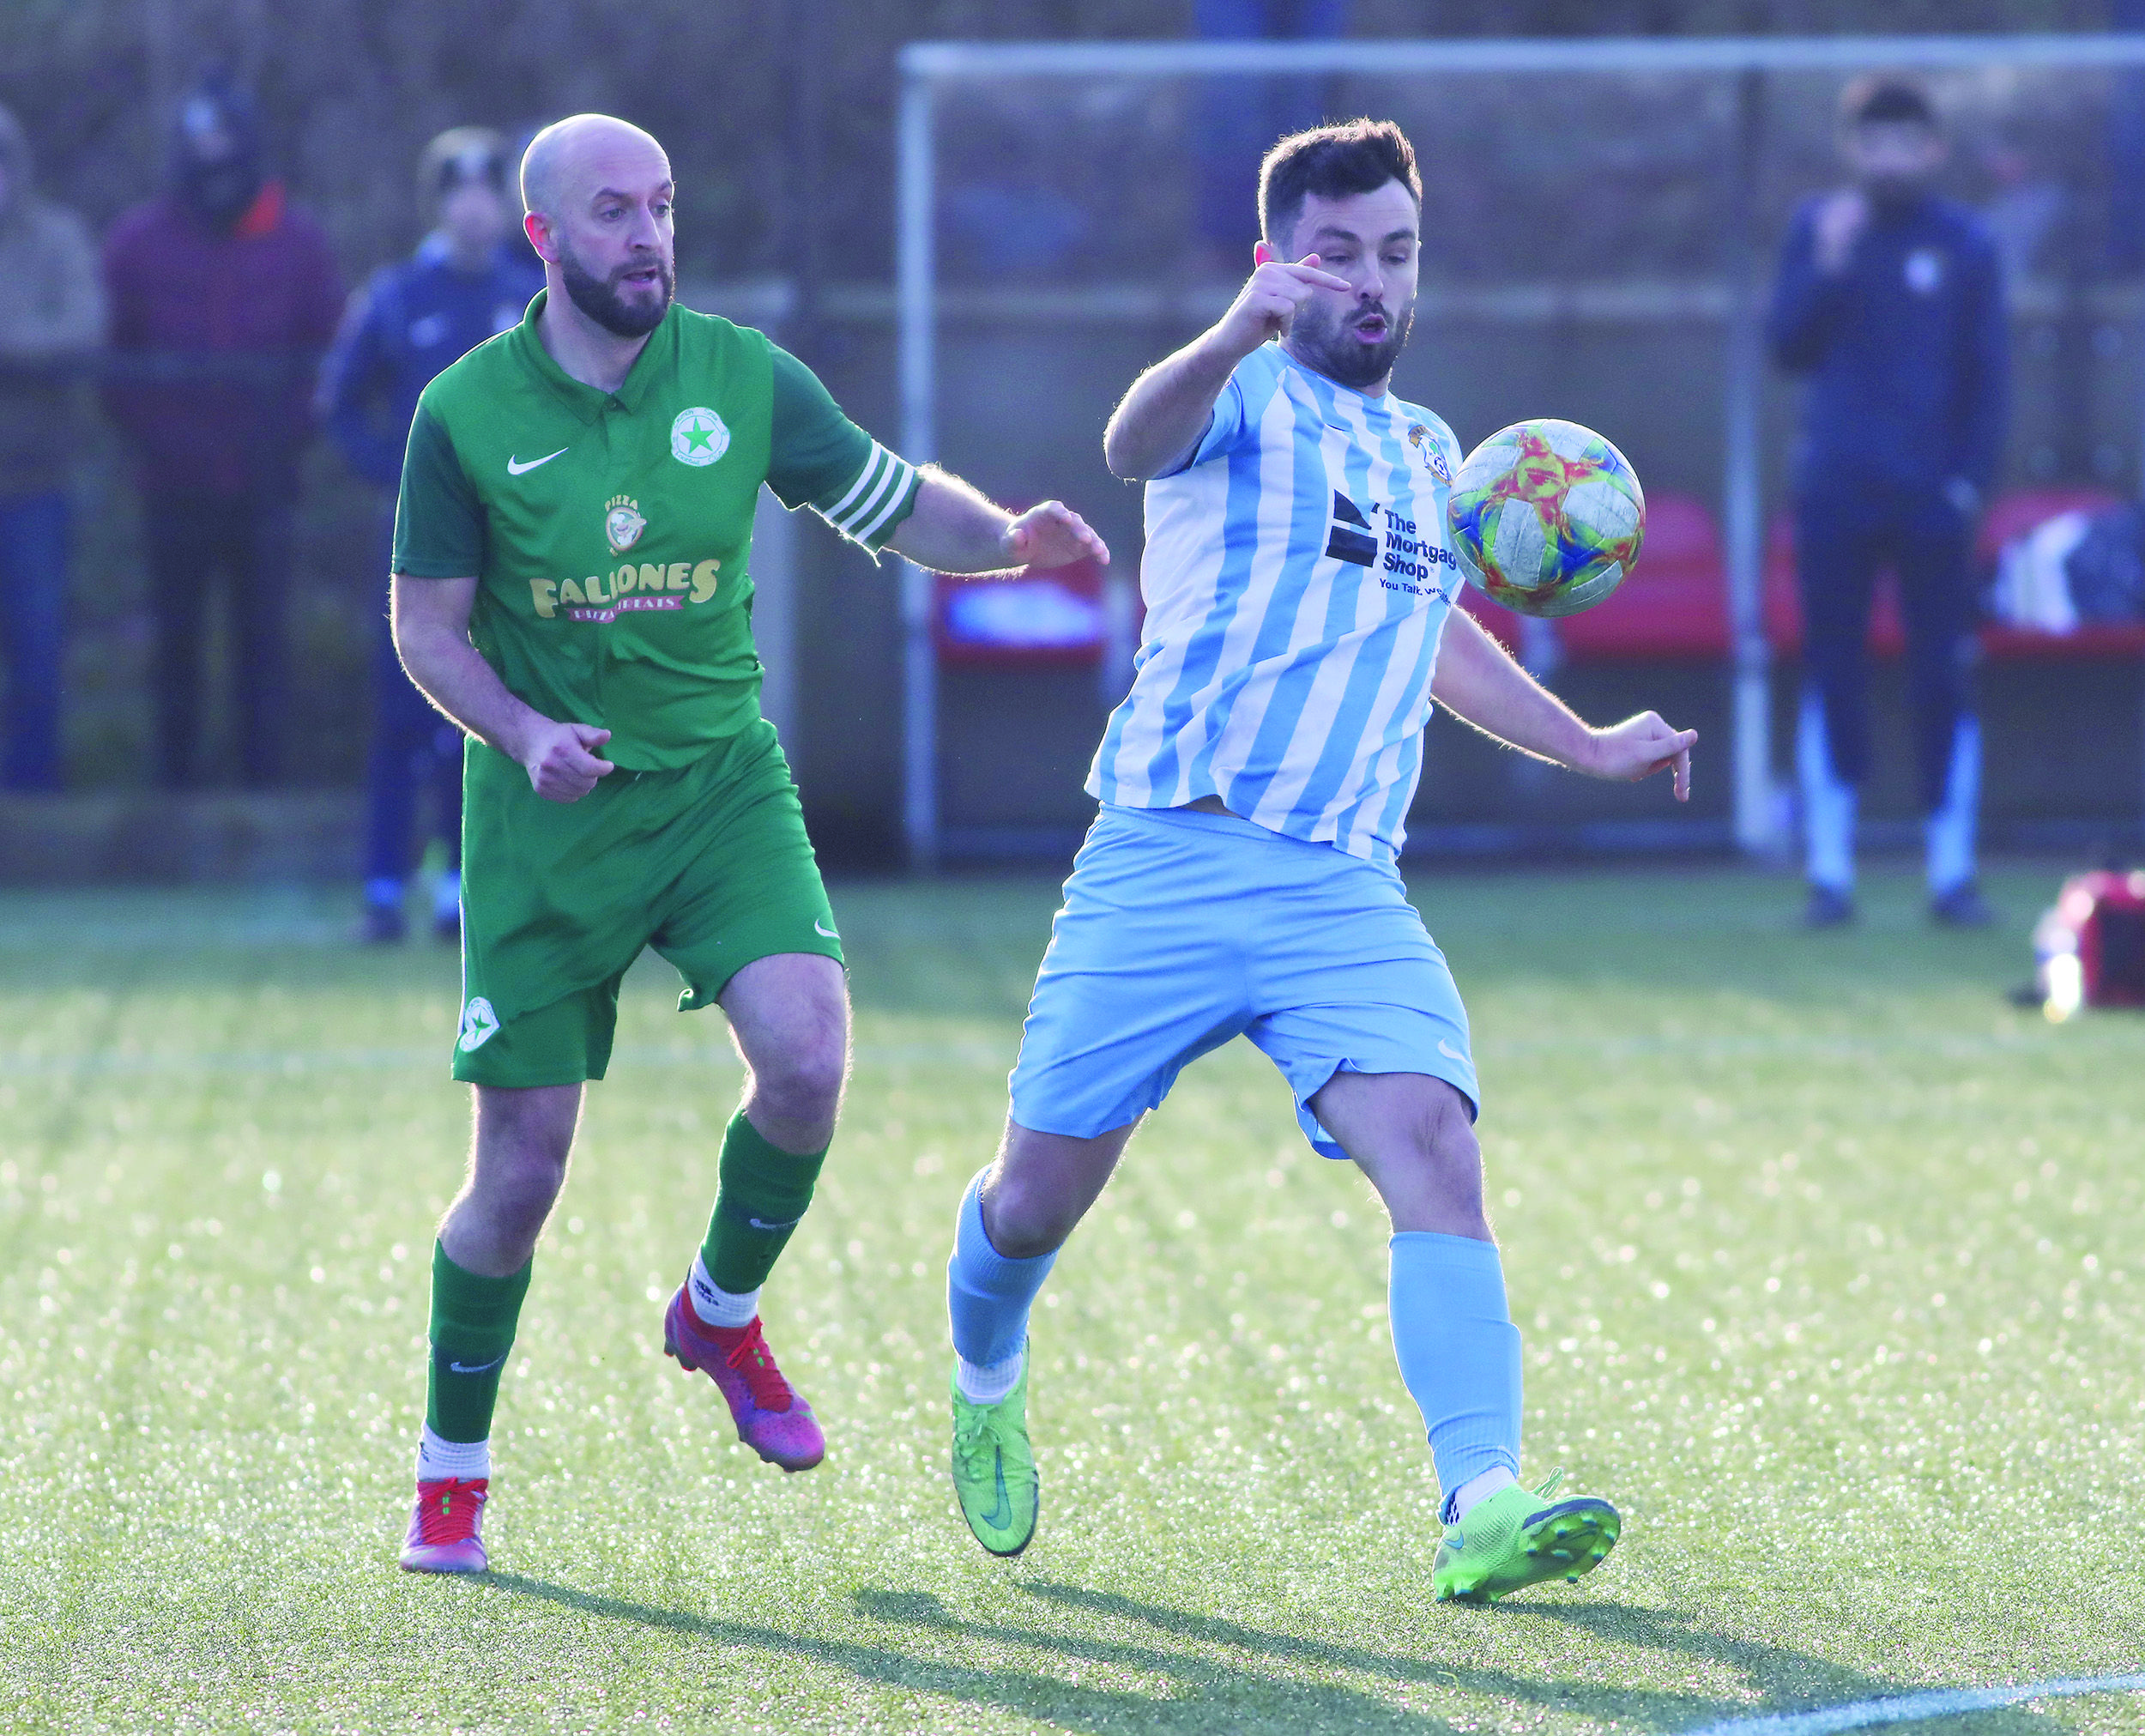 A depleted Immaculata lost out to Crumlin Star recently and drew with Derriaghy CC at the weekend, but manager Brian McCaul hopes to have a stronger hand for Saturday’s trip to Armagh City